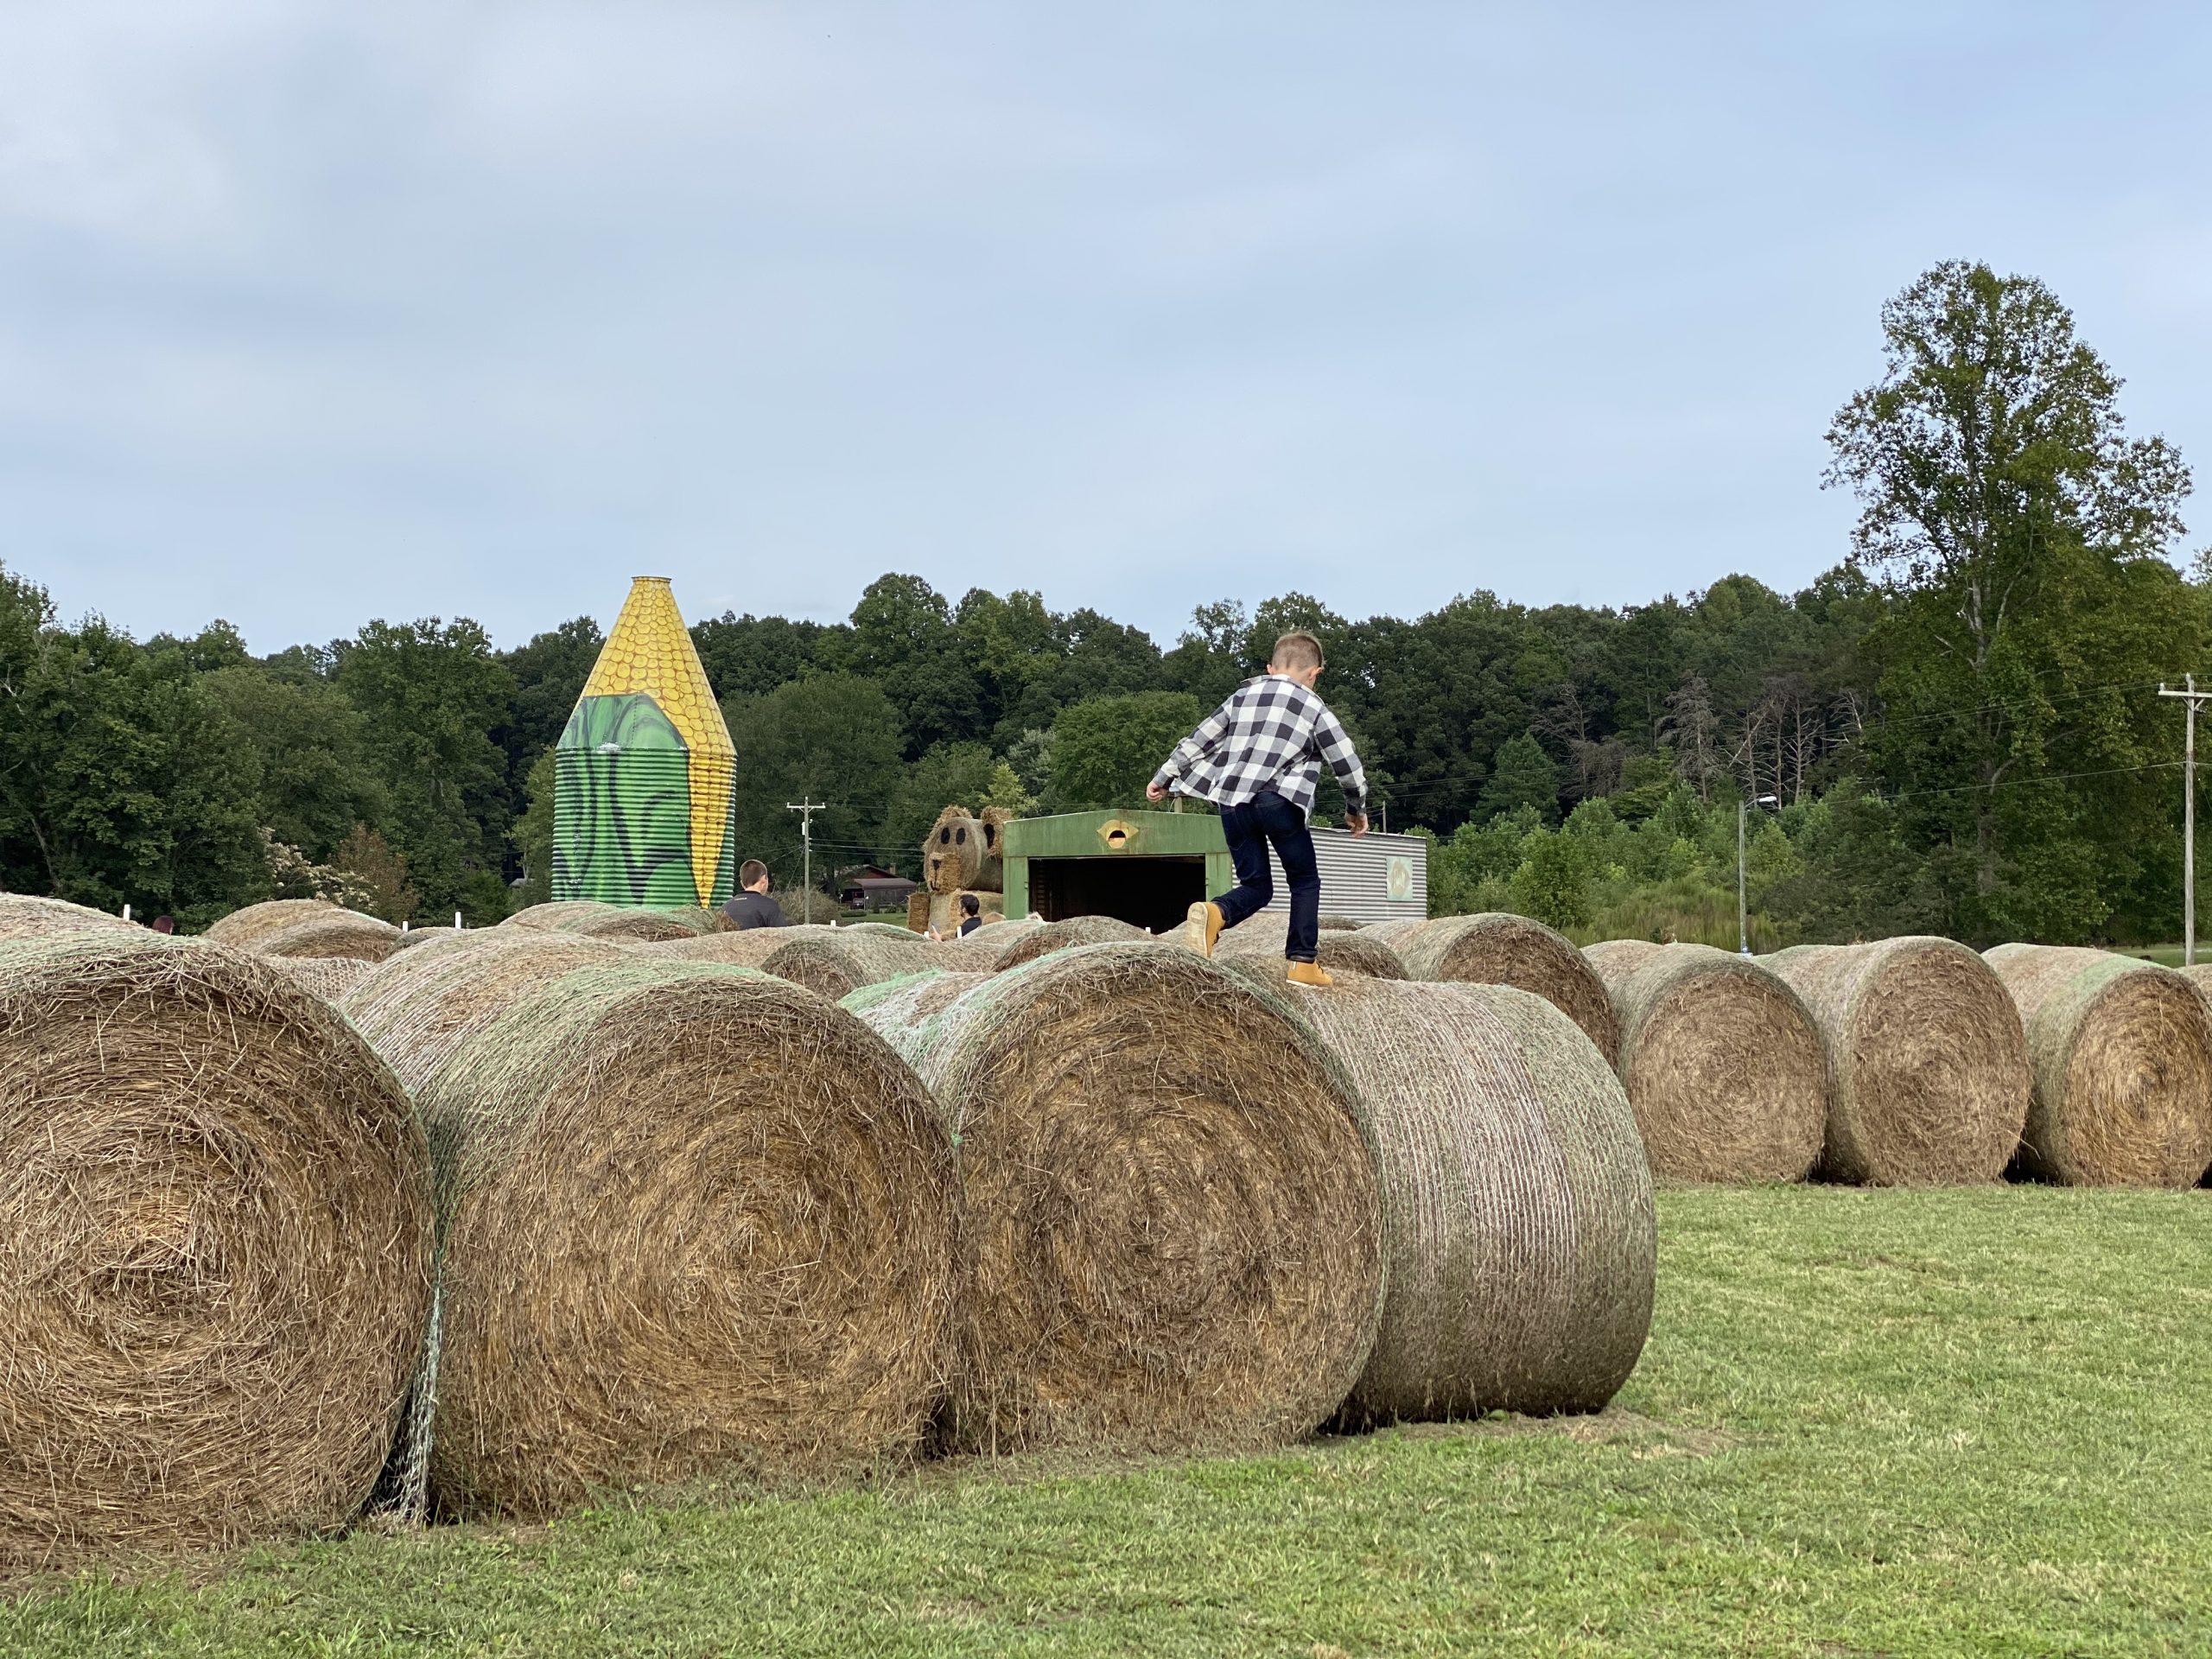 Corn Mazes in NC - Pumpkin Patches and Fall Things to Do - North Carolina - Alpha and Omega - Hay bale jumping